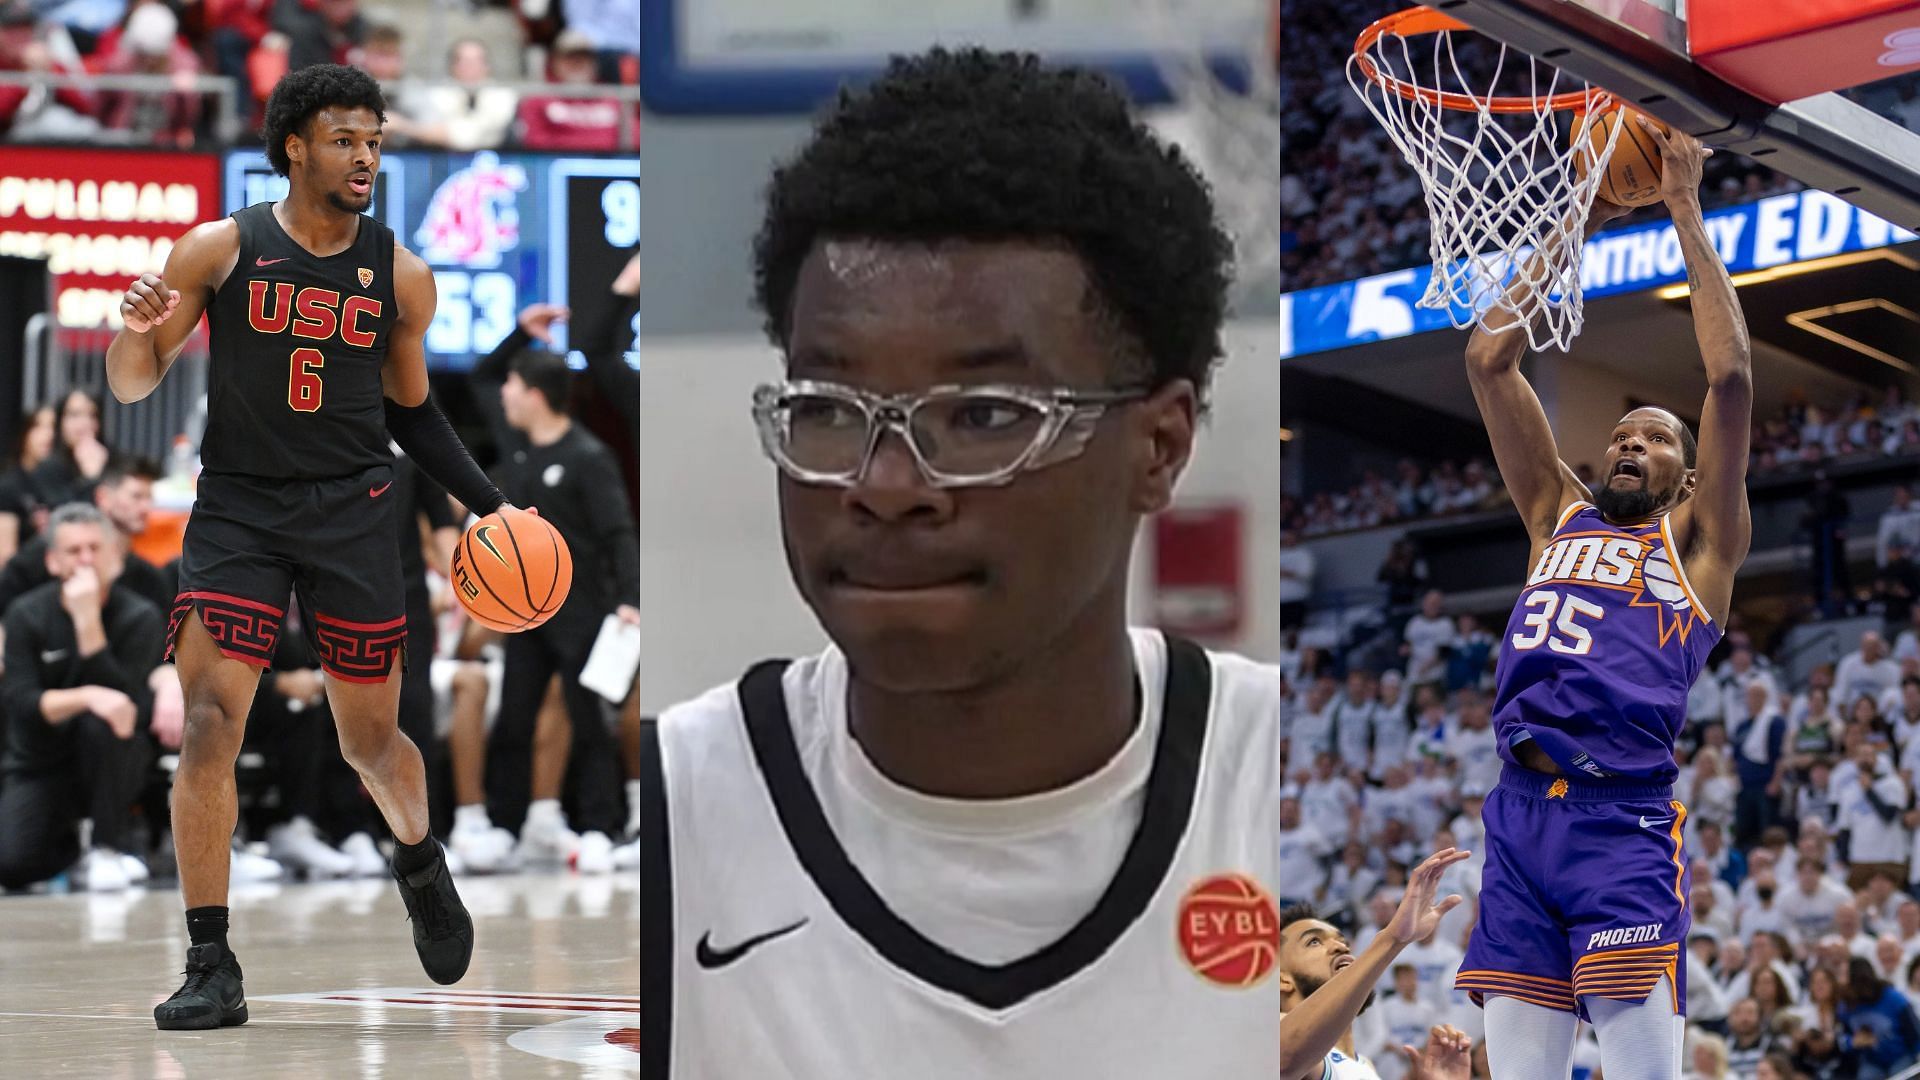 Bryce James draws comparison to Bronny James and Kevin Durant